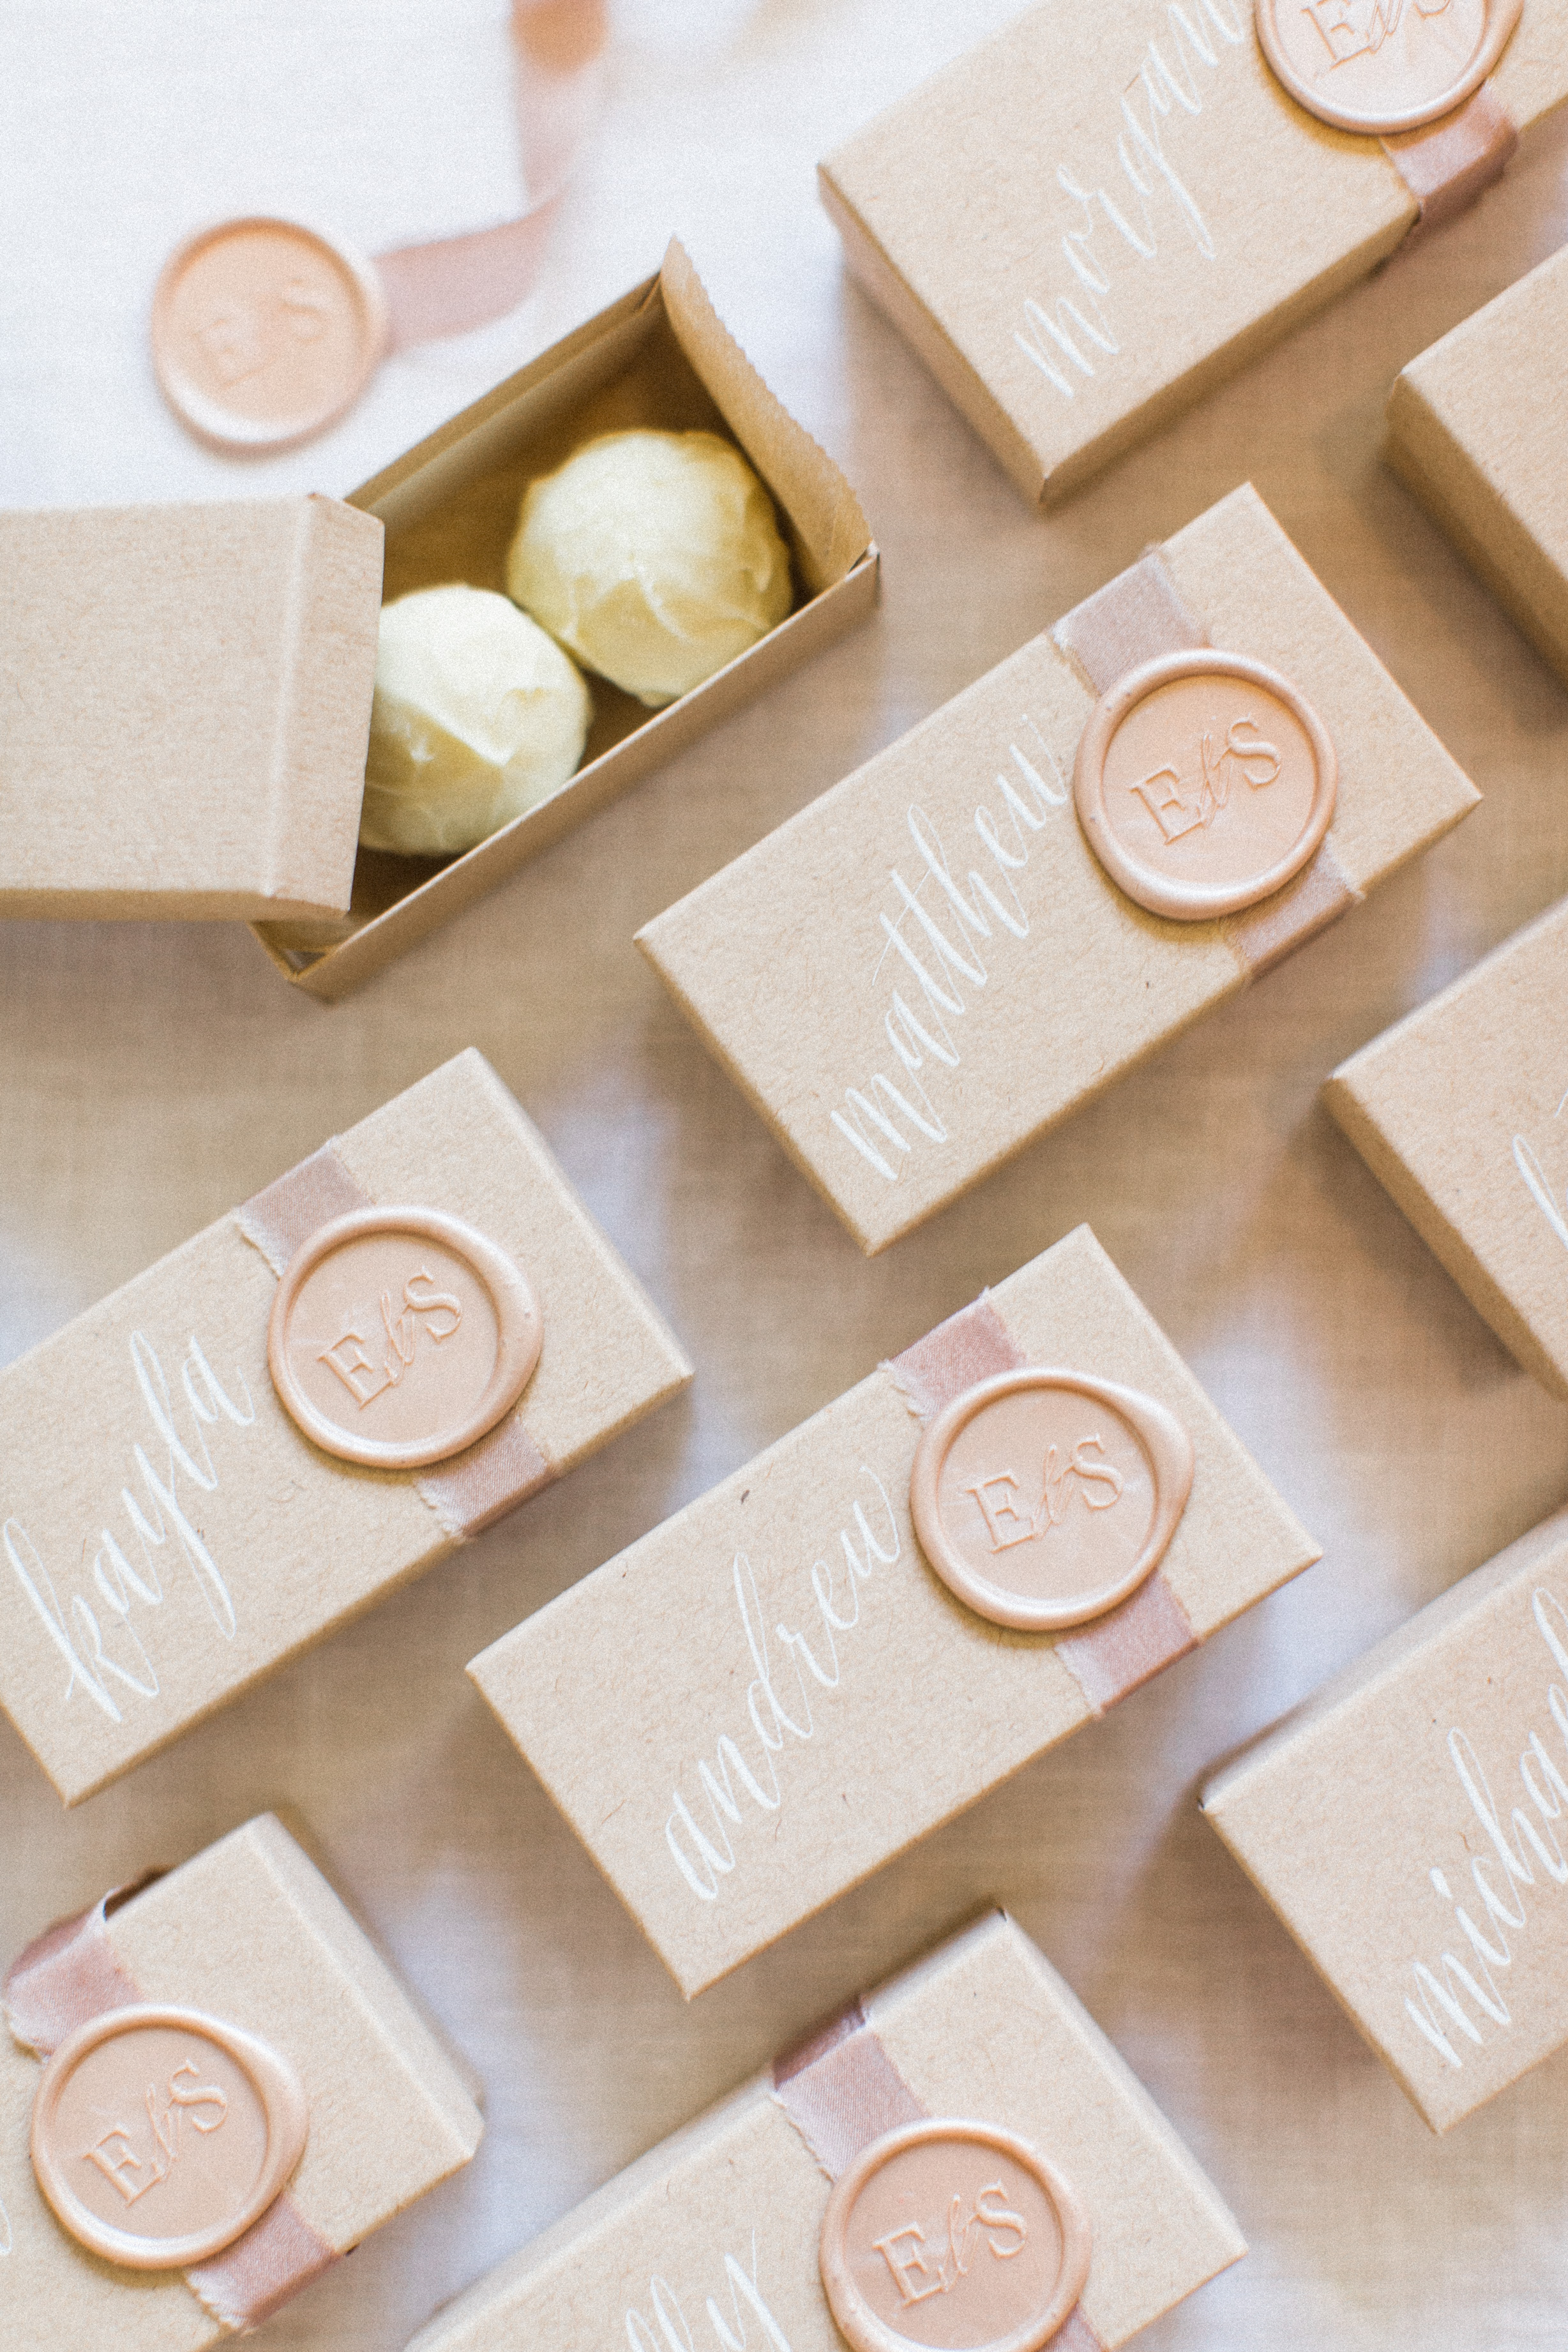 Wedding Place Cards That Are Truly Unique | Martha Stewart ...